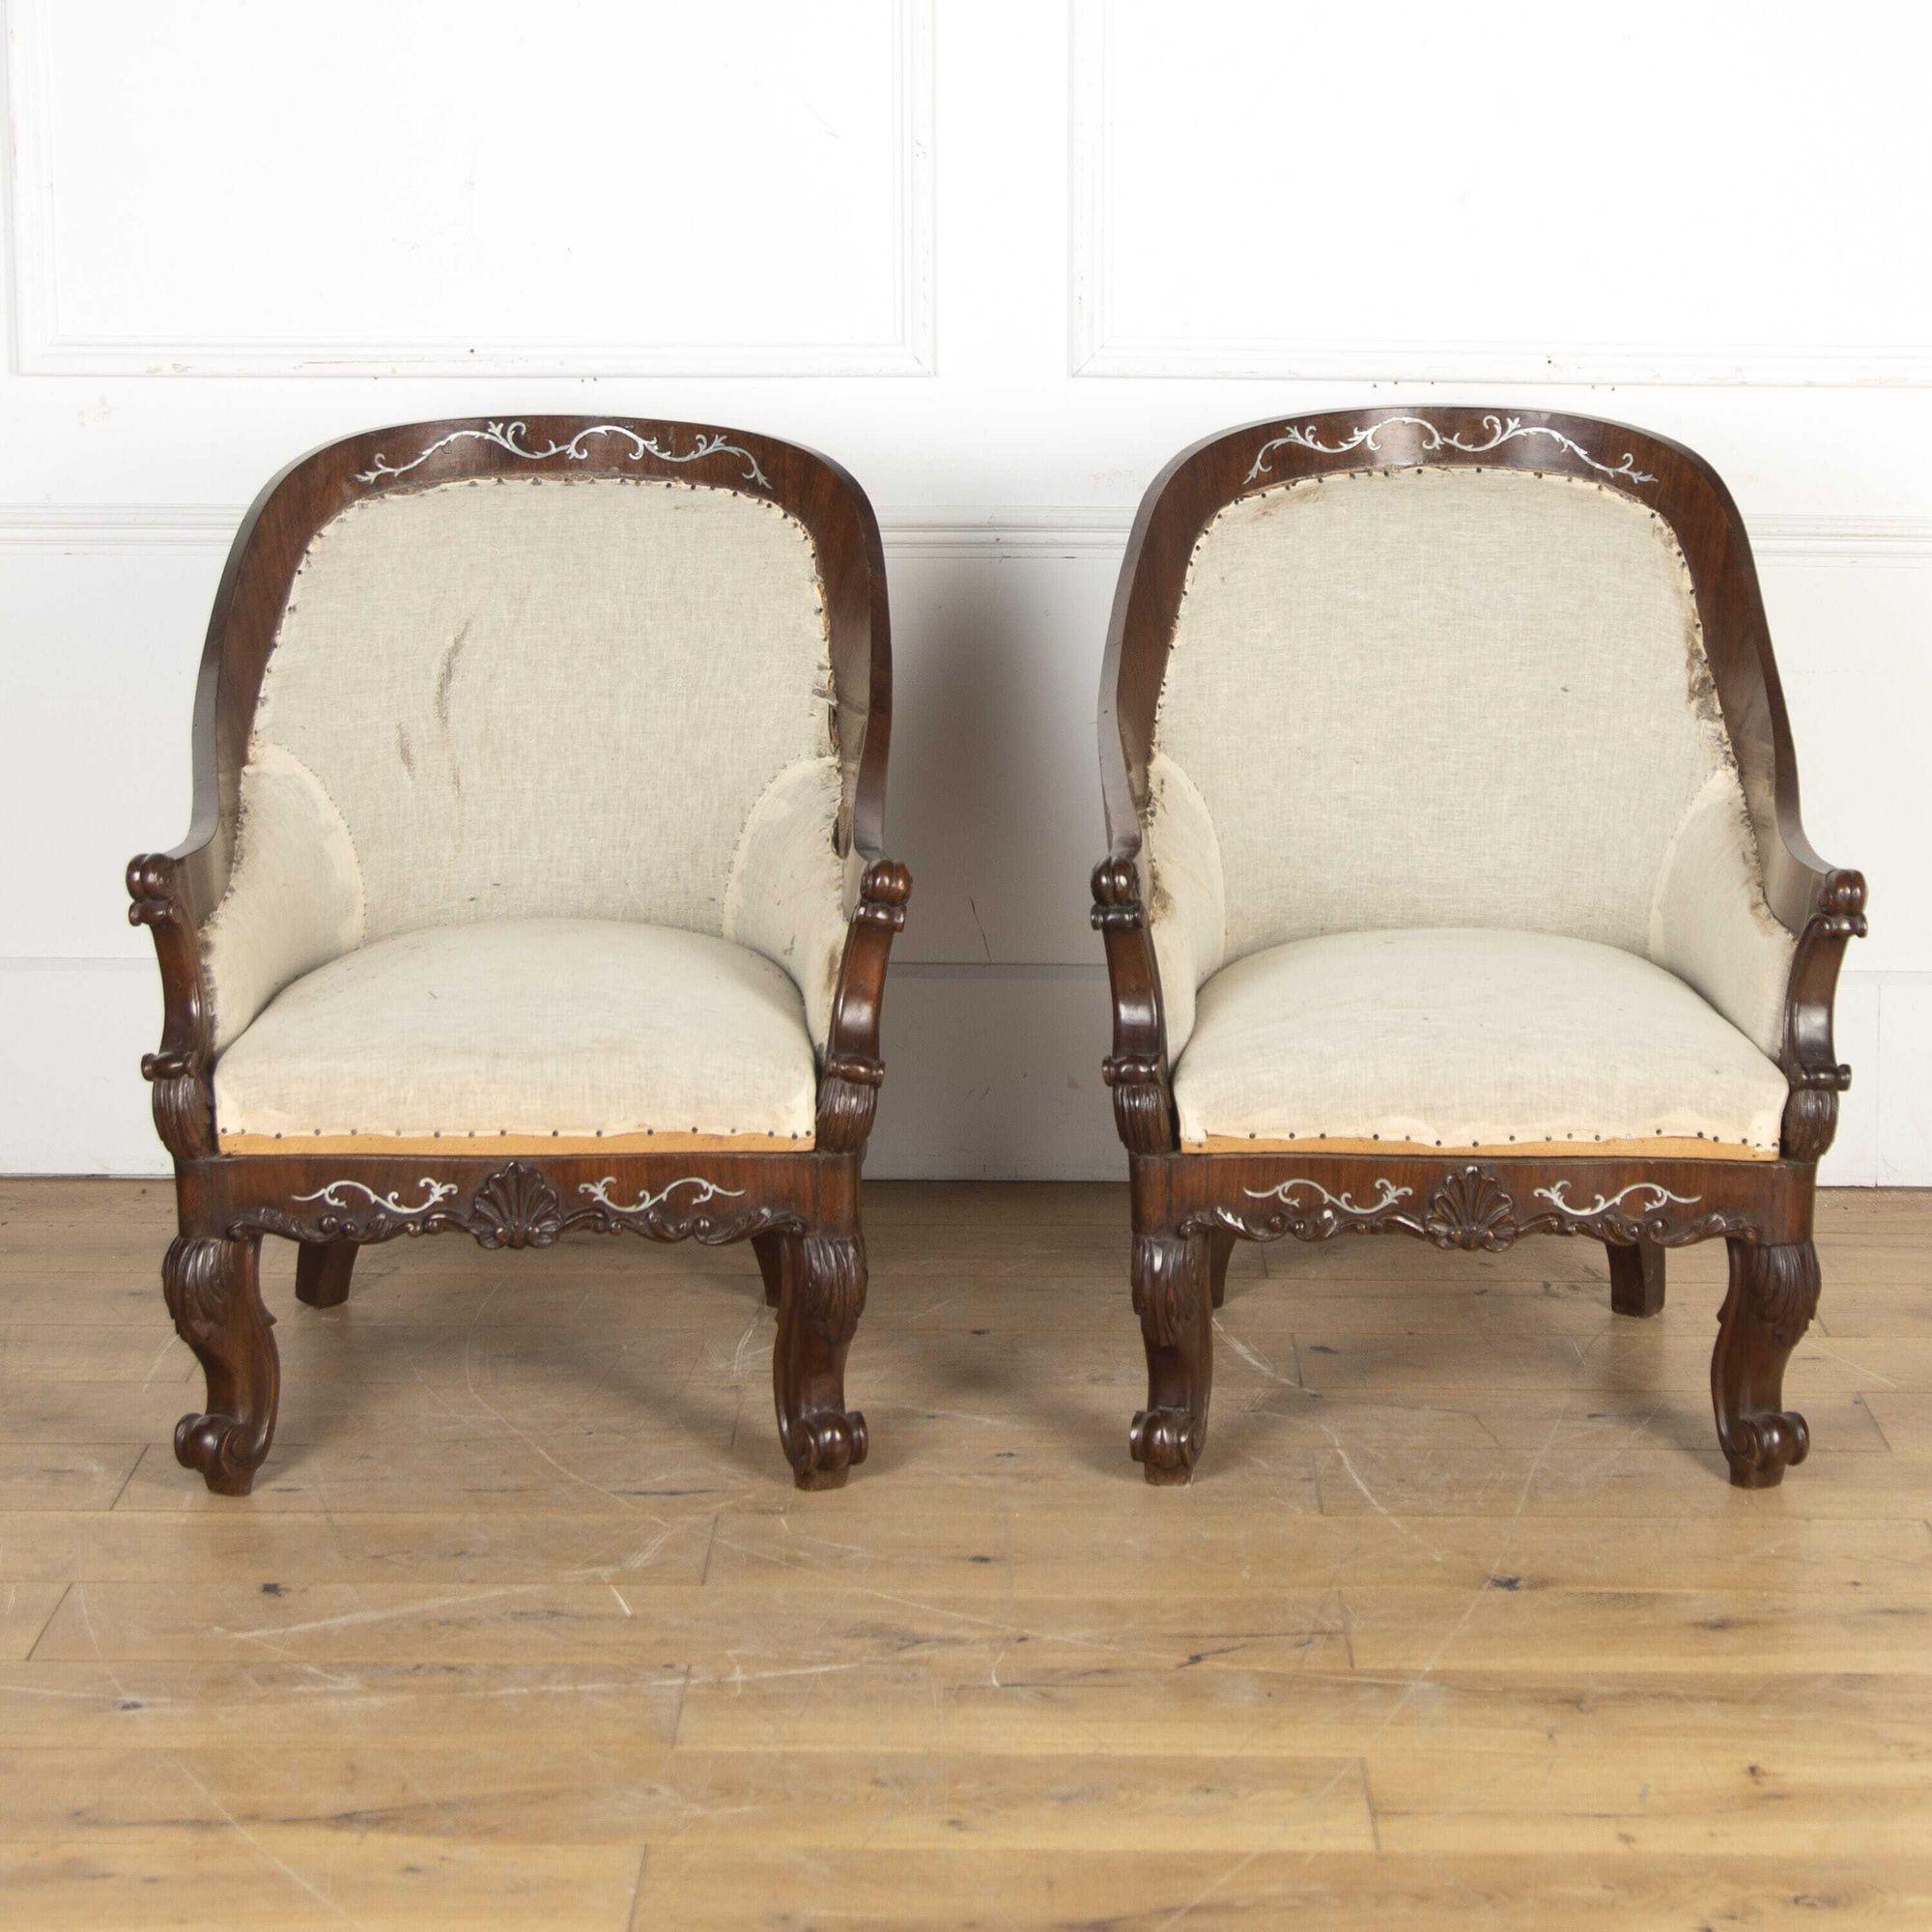 Pair of Early 19th Century Spanish pewter inlaid armchairs.
Dating from the Early 19th Century and of Spanish/Majorca origins, this pair of armchairs is inlaid with pewter and has barrel backs supported on shaped cabriole legs with upturned scroll